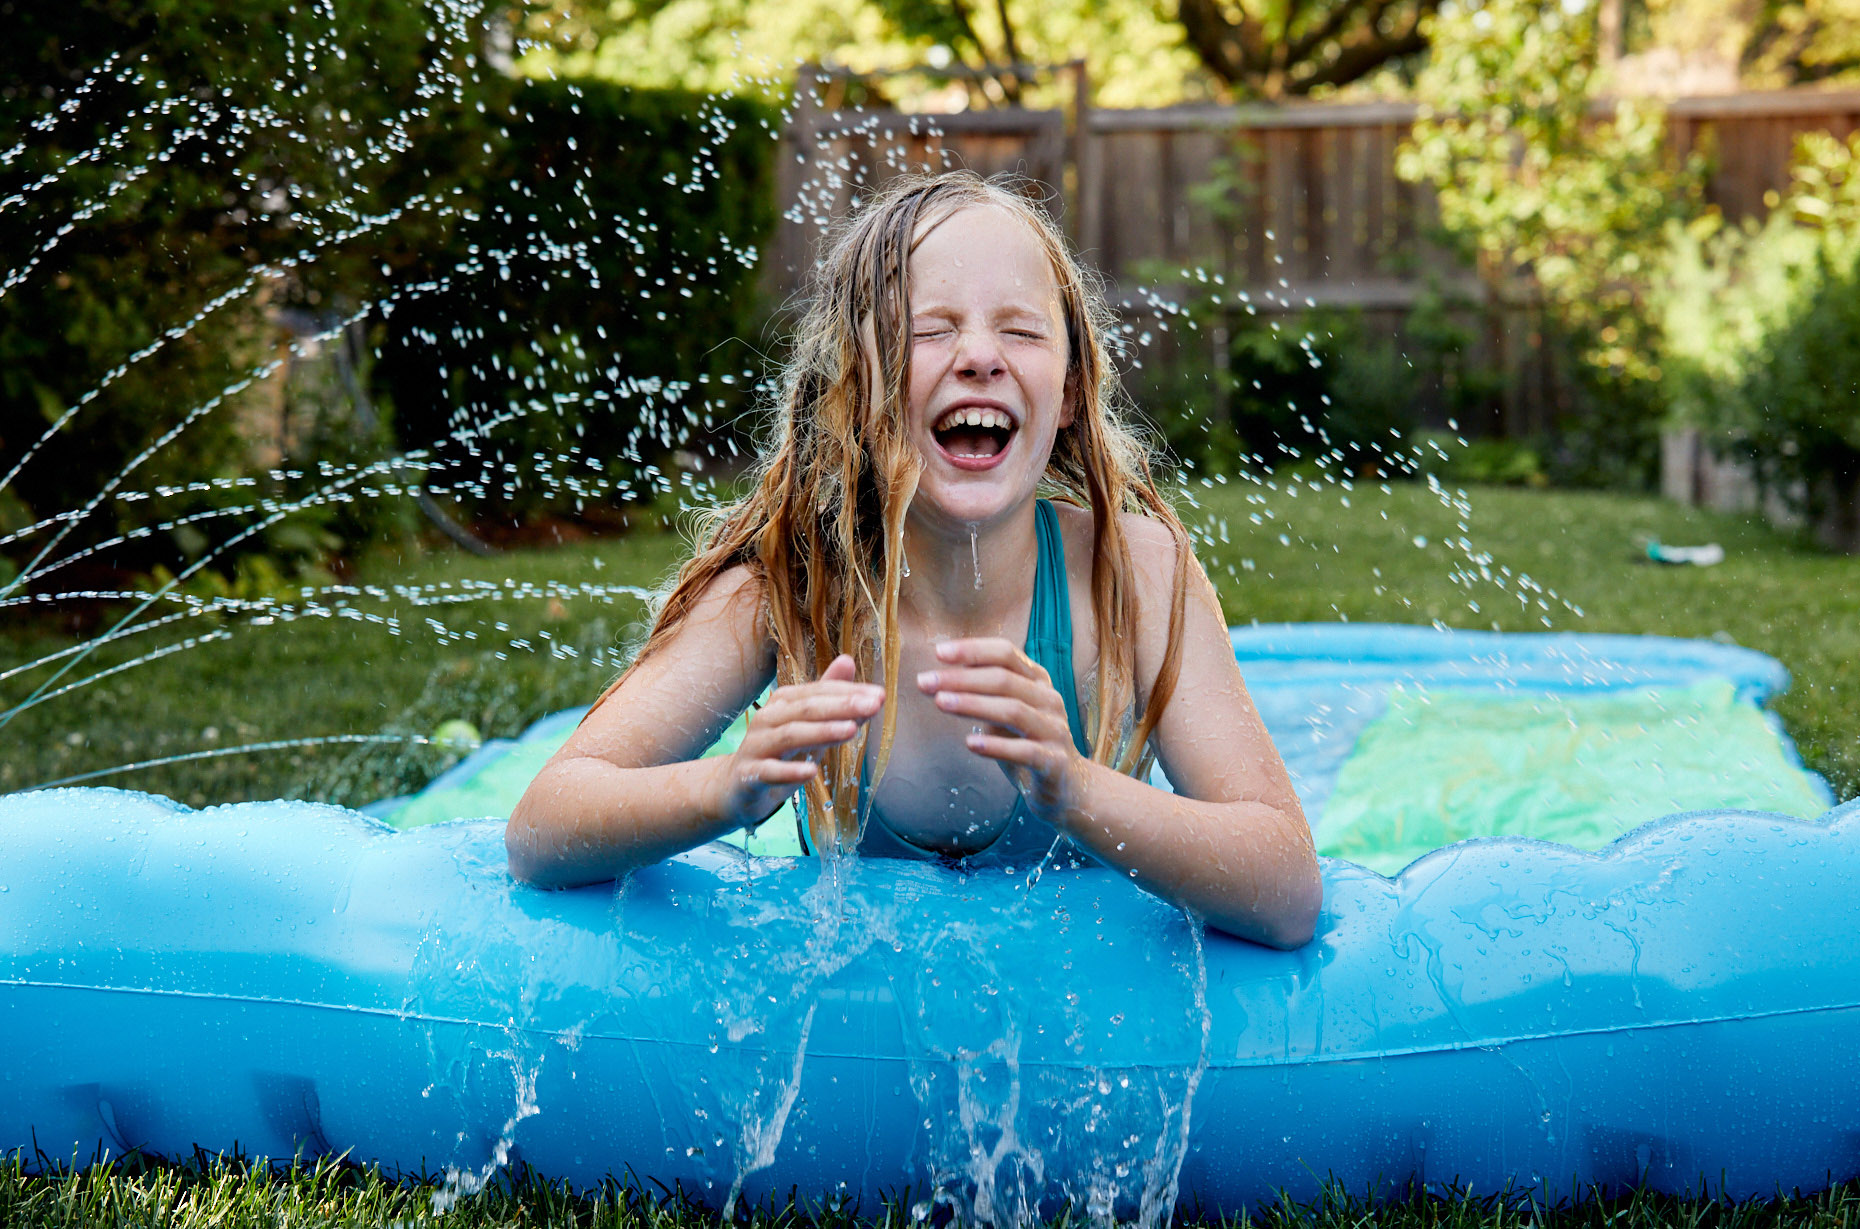 Tween girl on slip and slide in suburbs | Childrens photography by Saverio Truglia